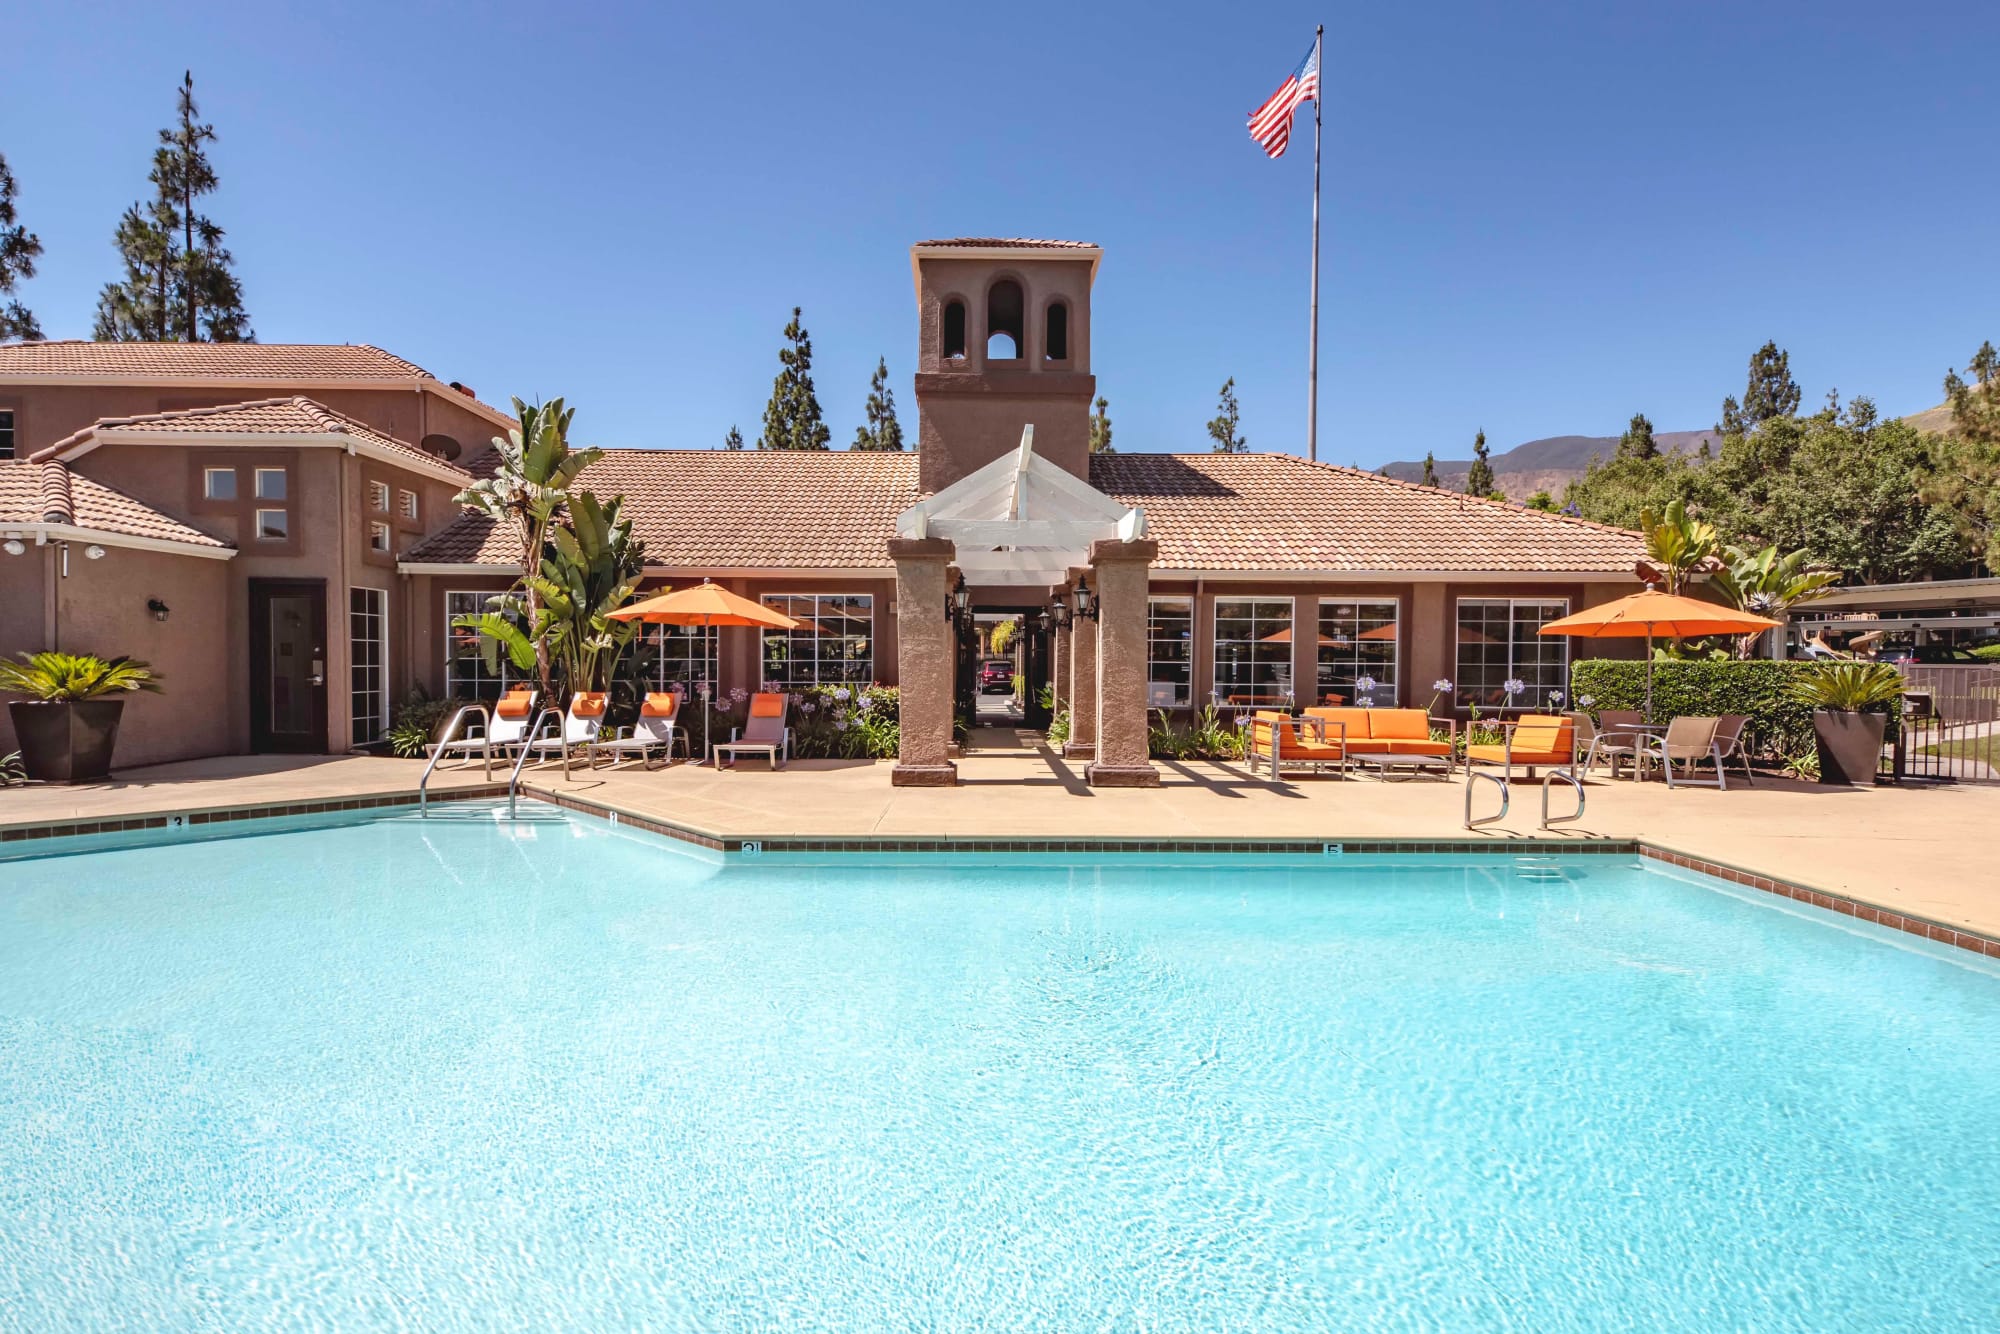 Resort-style swimming pool with lounge chairs and umbrellas at Sierra Del Oro Apartments in Corona, California